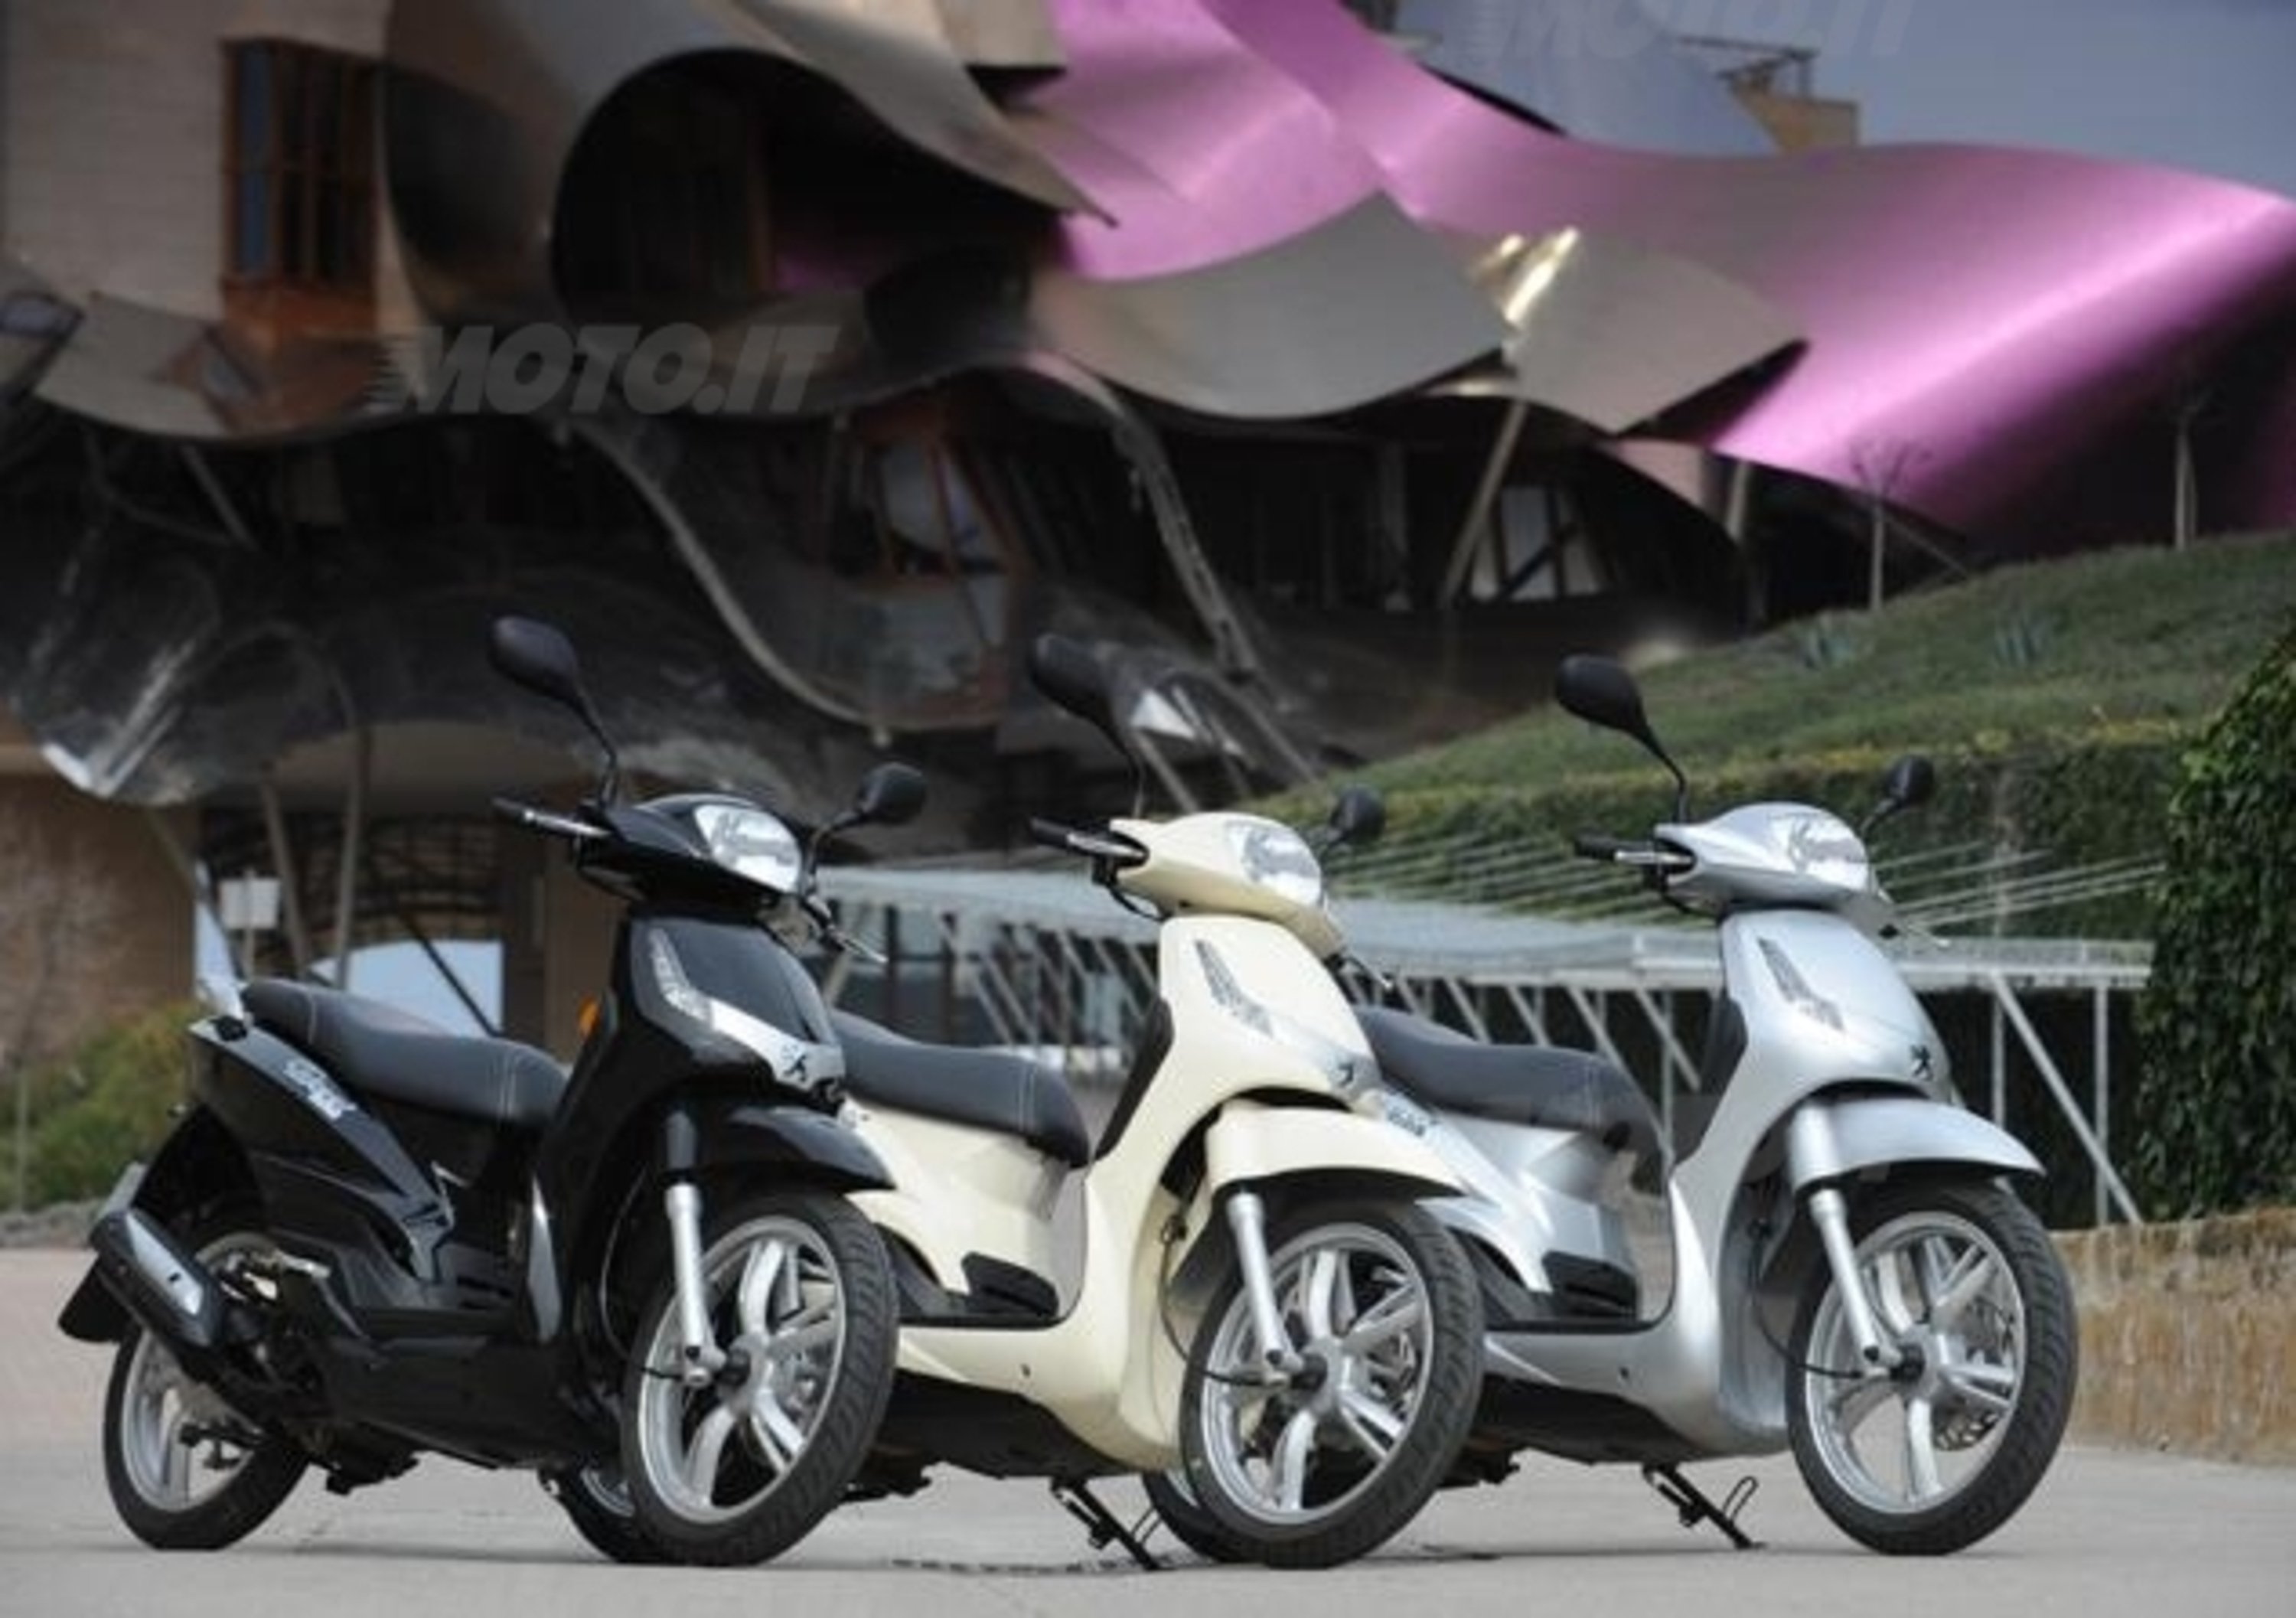 Promozioni. Check Up Peugeot Scooters a 9 Euro